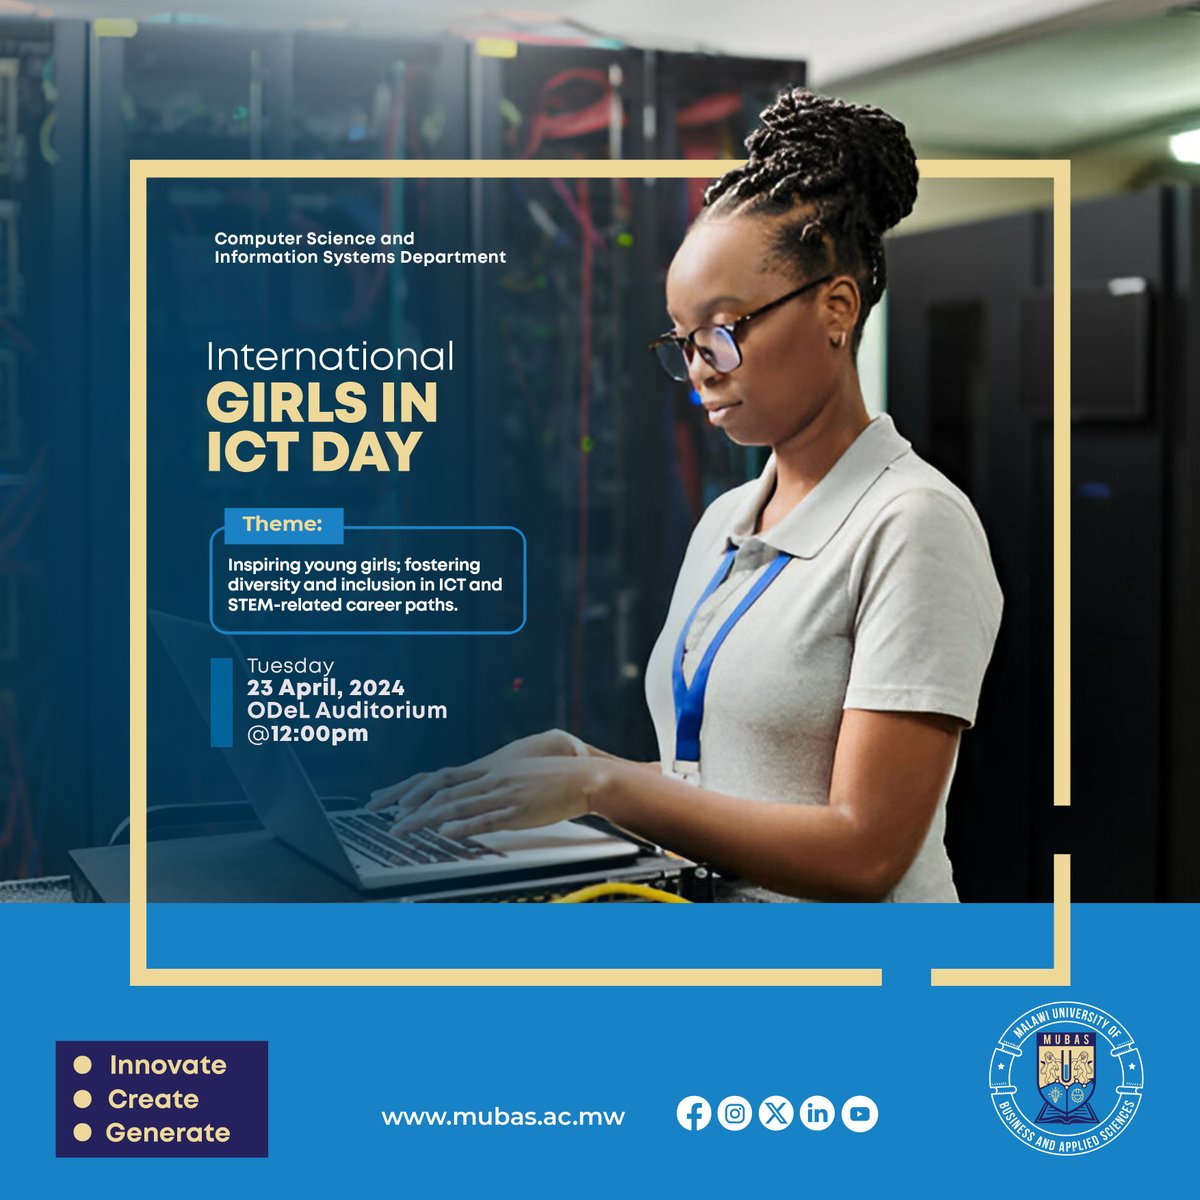 As the whole world commemorates girls in ICT, MUBAS through the CSIS Department will host an International Girls in ICT Day 📅Tuesday 23 April 2024 🕛12:00pm 📍 ODeL Auditorium #InternationalGirlsInICT #TheHomeOfInnovation #Innovate #Create #Generate